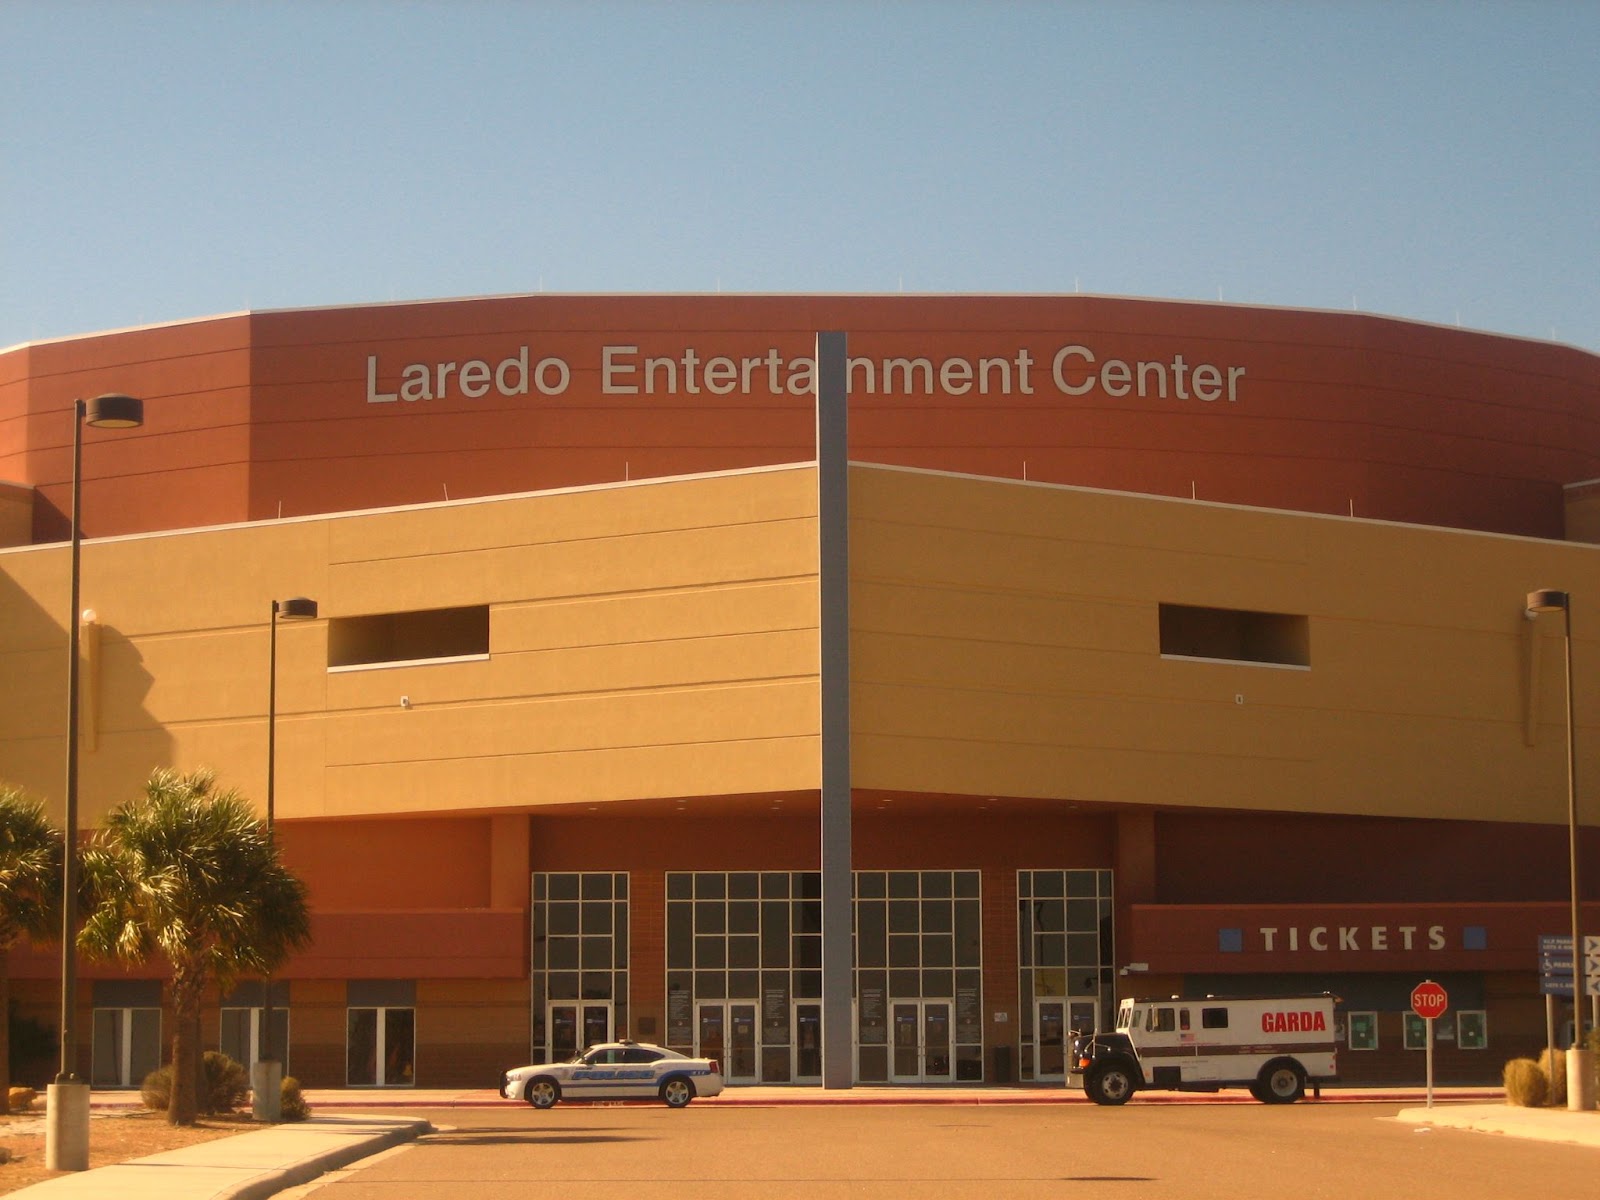 Important events should be held in the Sames Auto Arena.